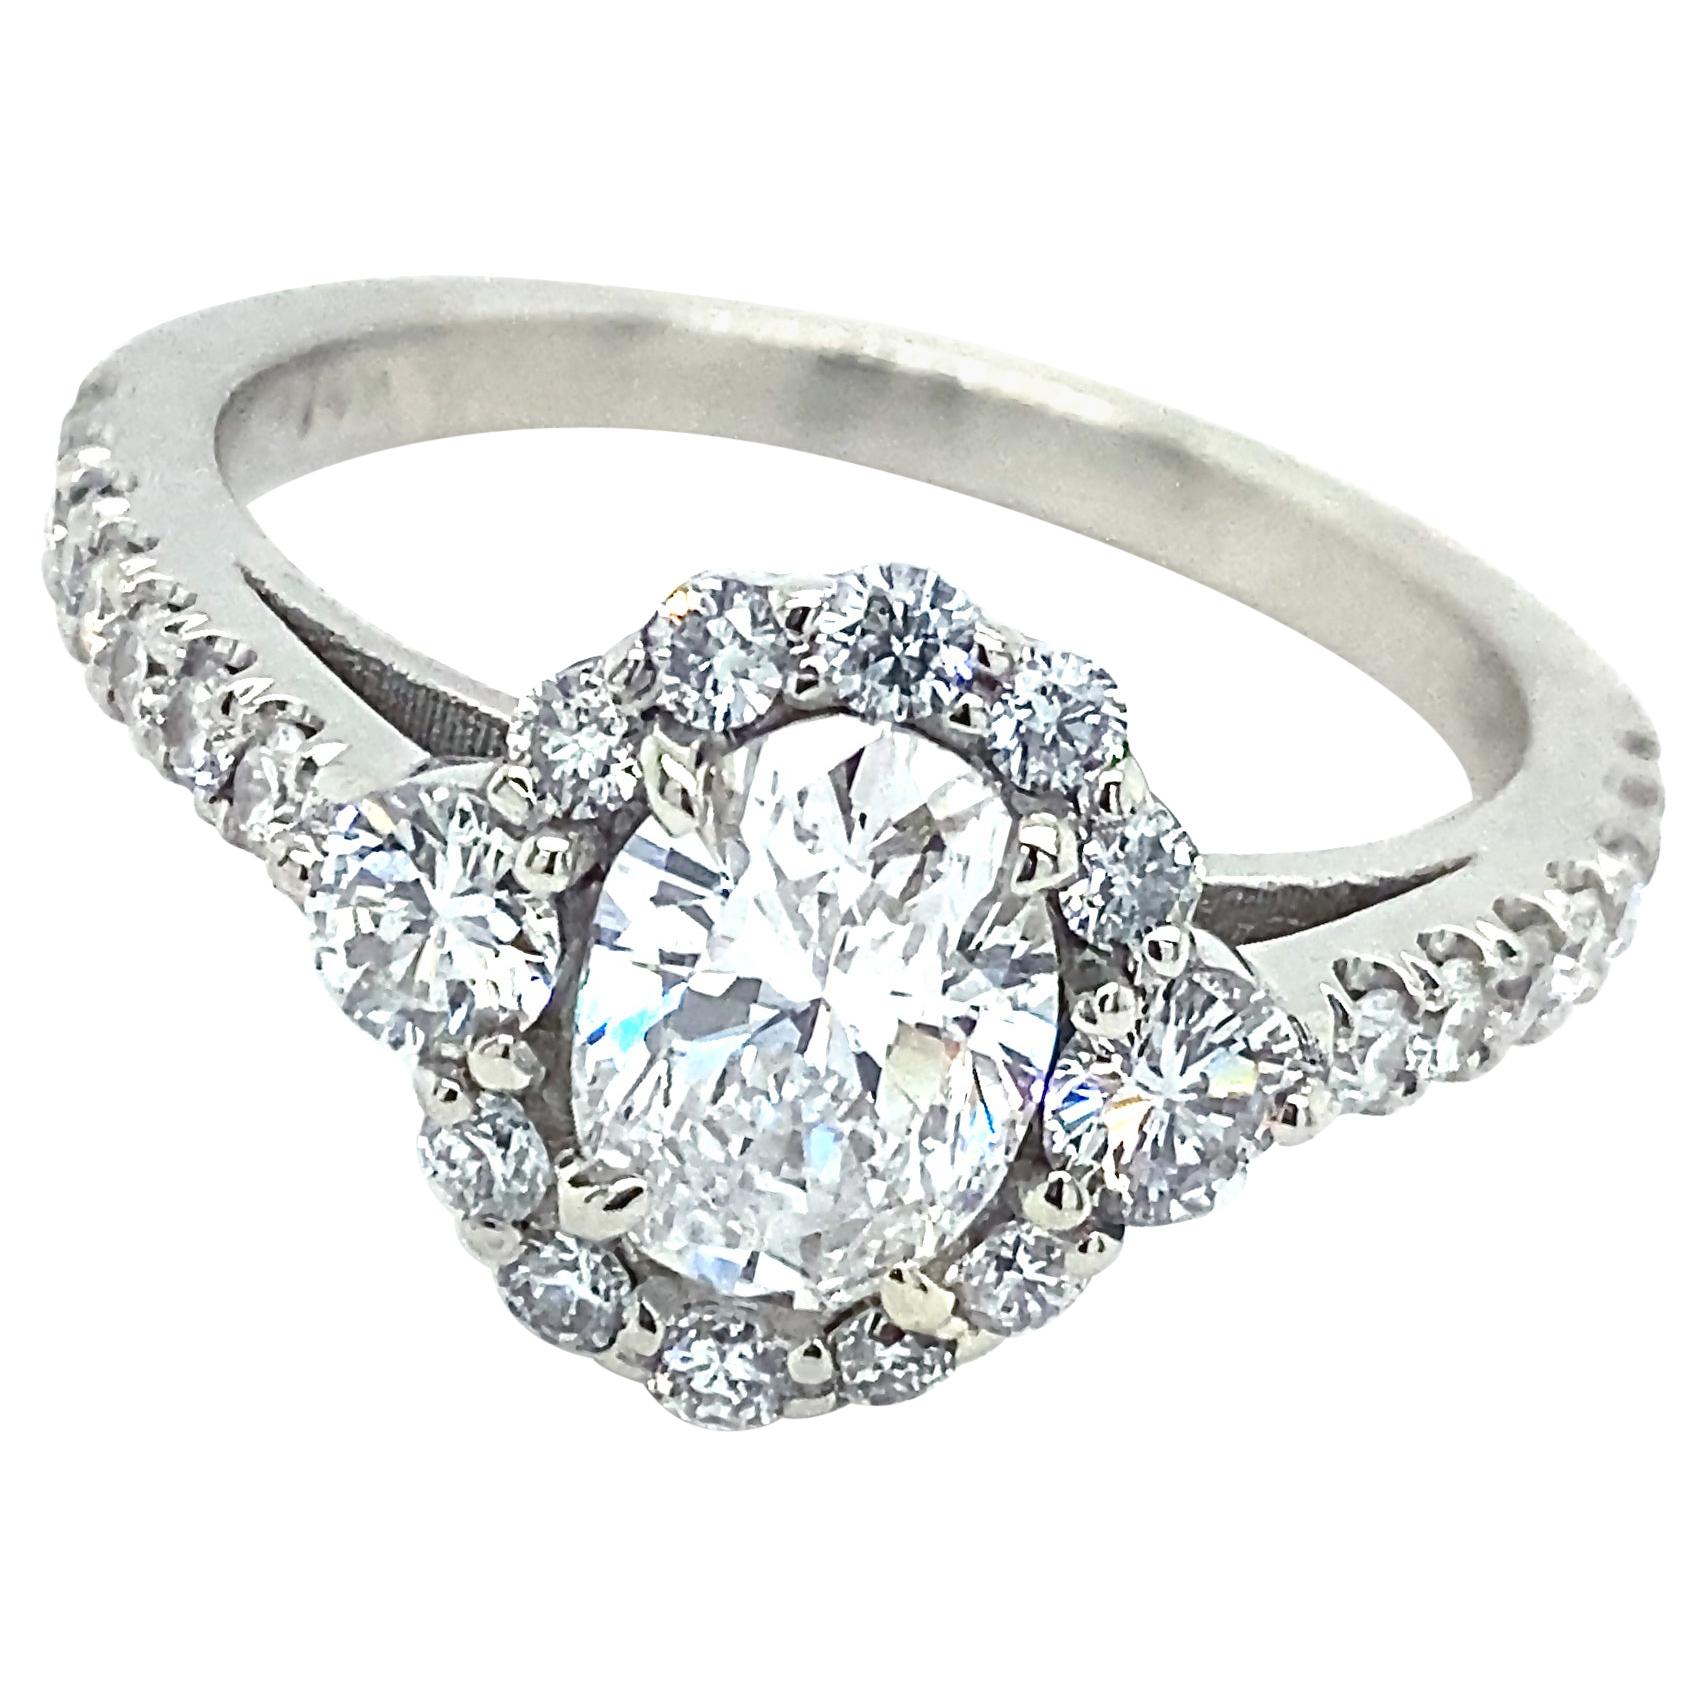 GIA Certified D Colorless 0.80 Carat Oval Diamond in White Gold Engagement Ring